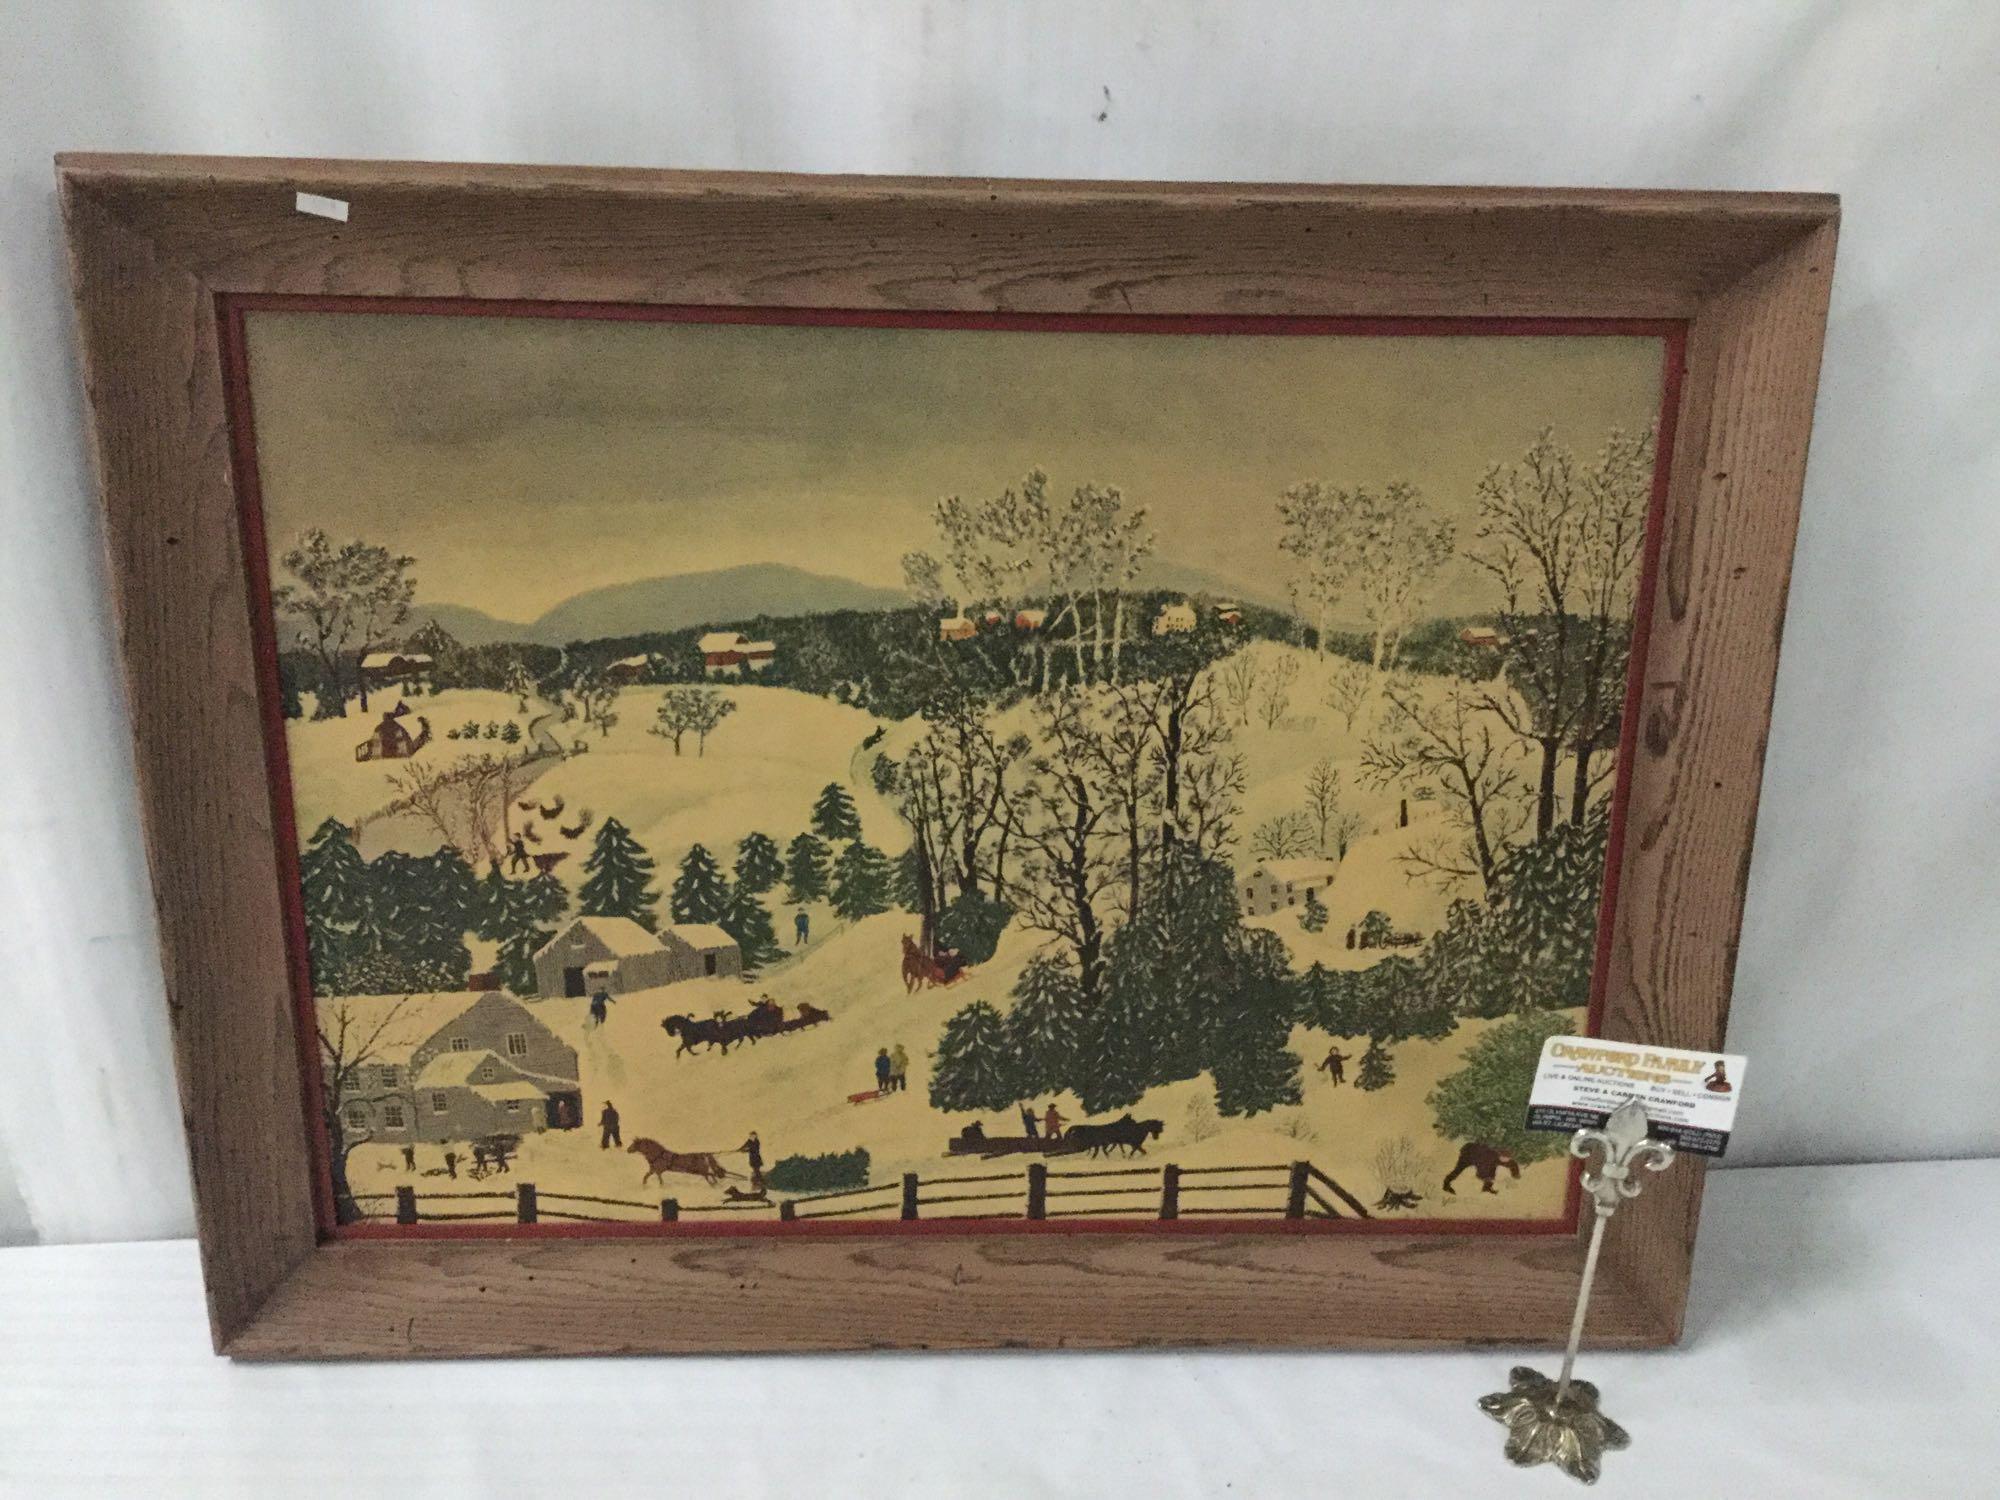 Festive holiday framed print of Out for the Christmas Trees by Grandma Moses.